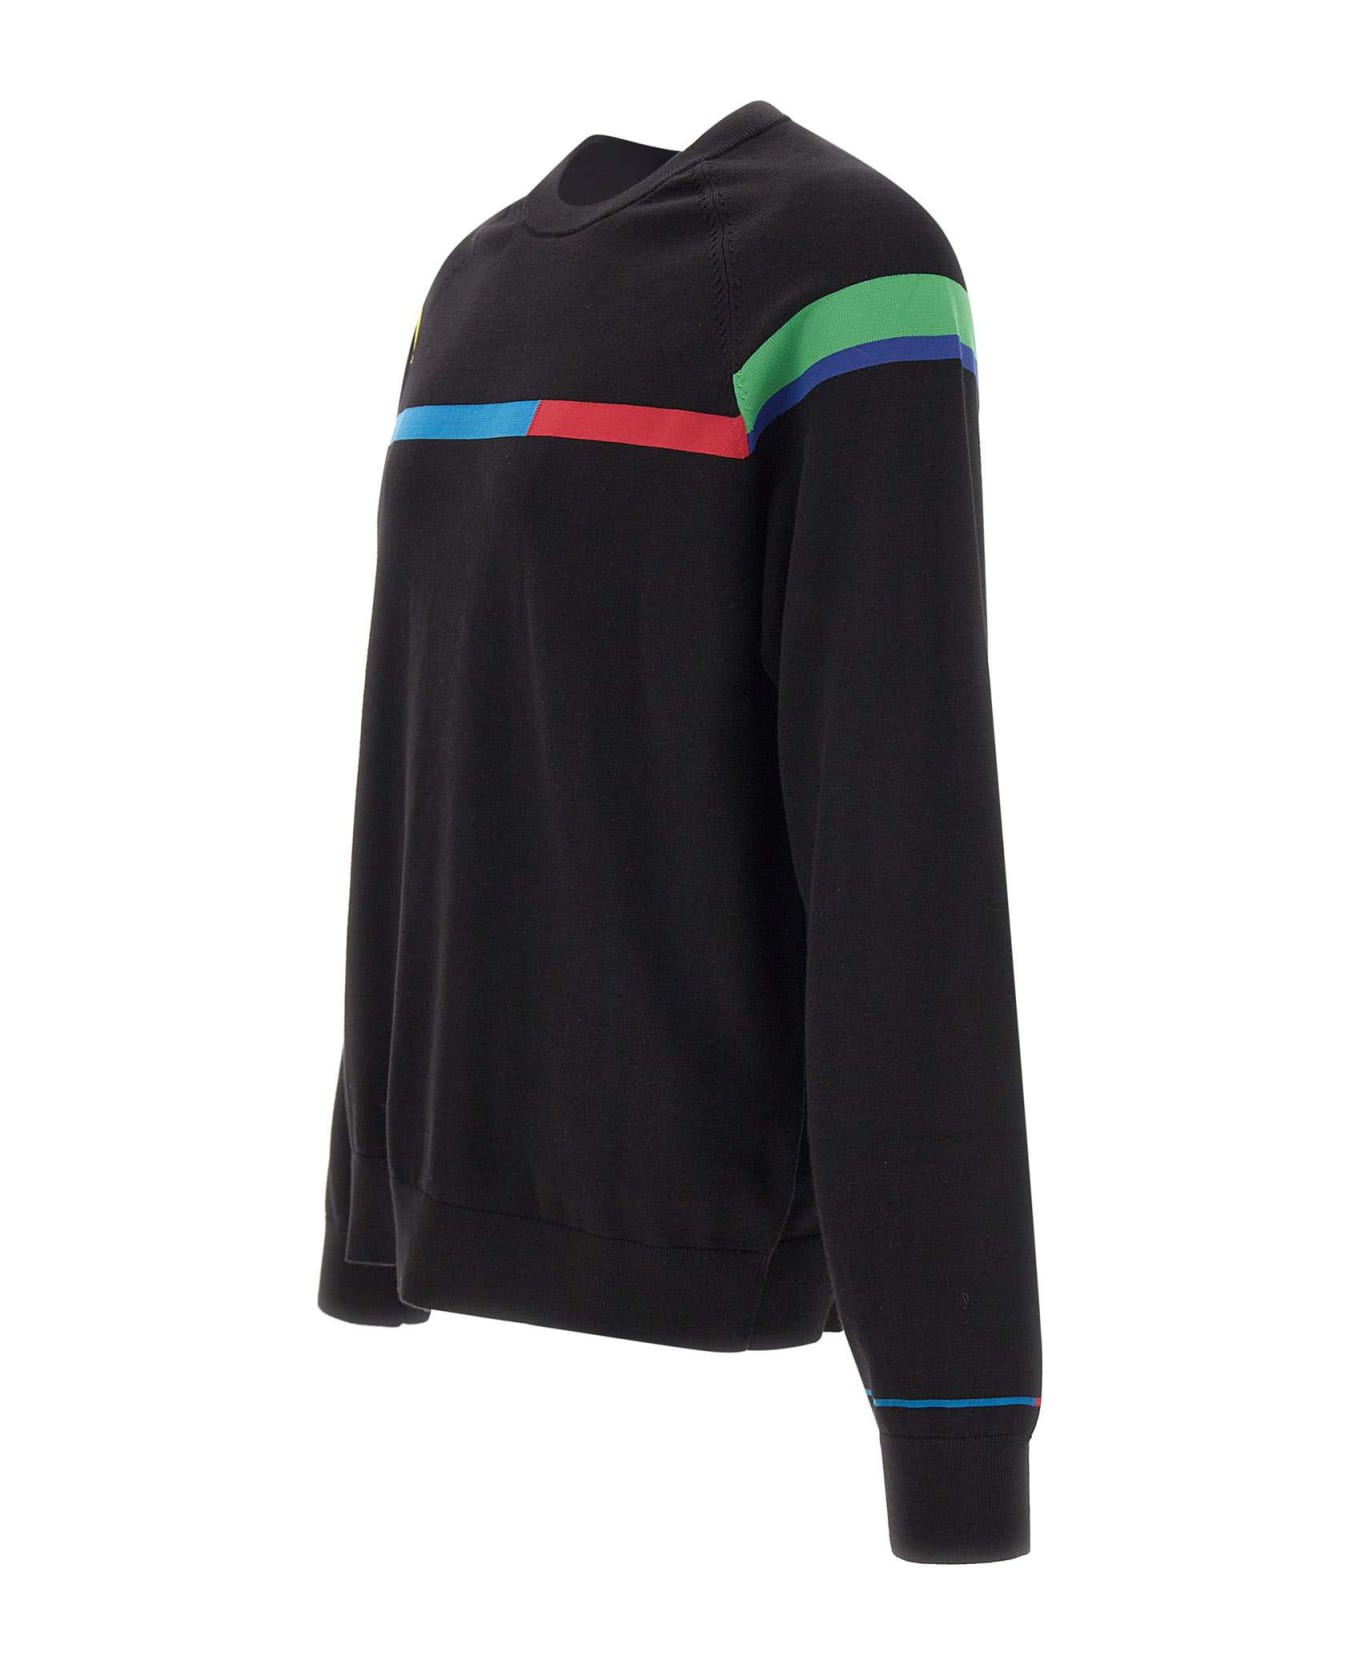 PS by Paul Smith Organic Cotton Sweater - BLACK ニットウェア